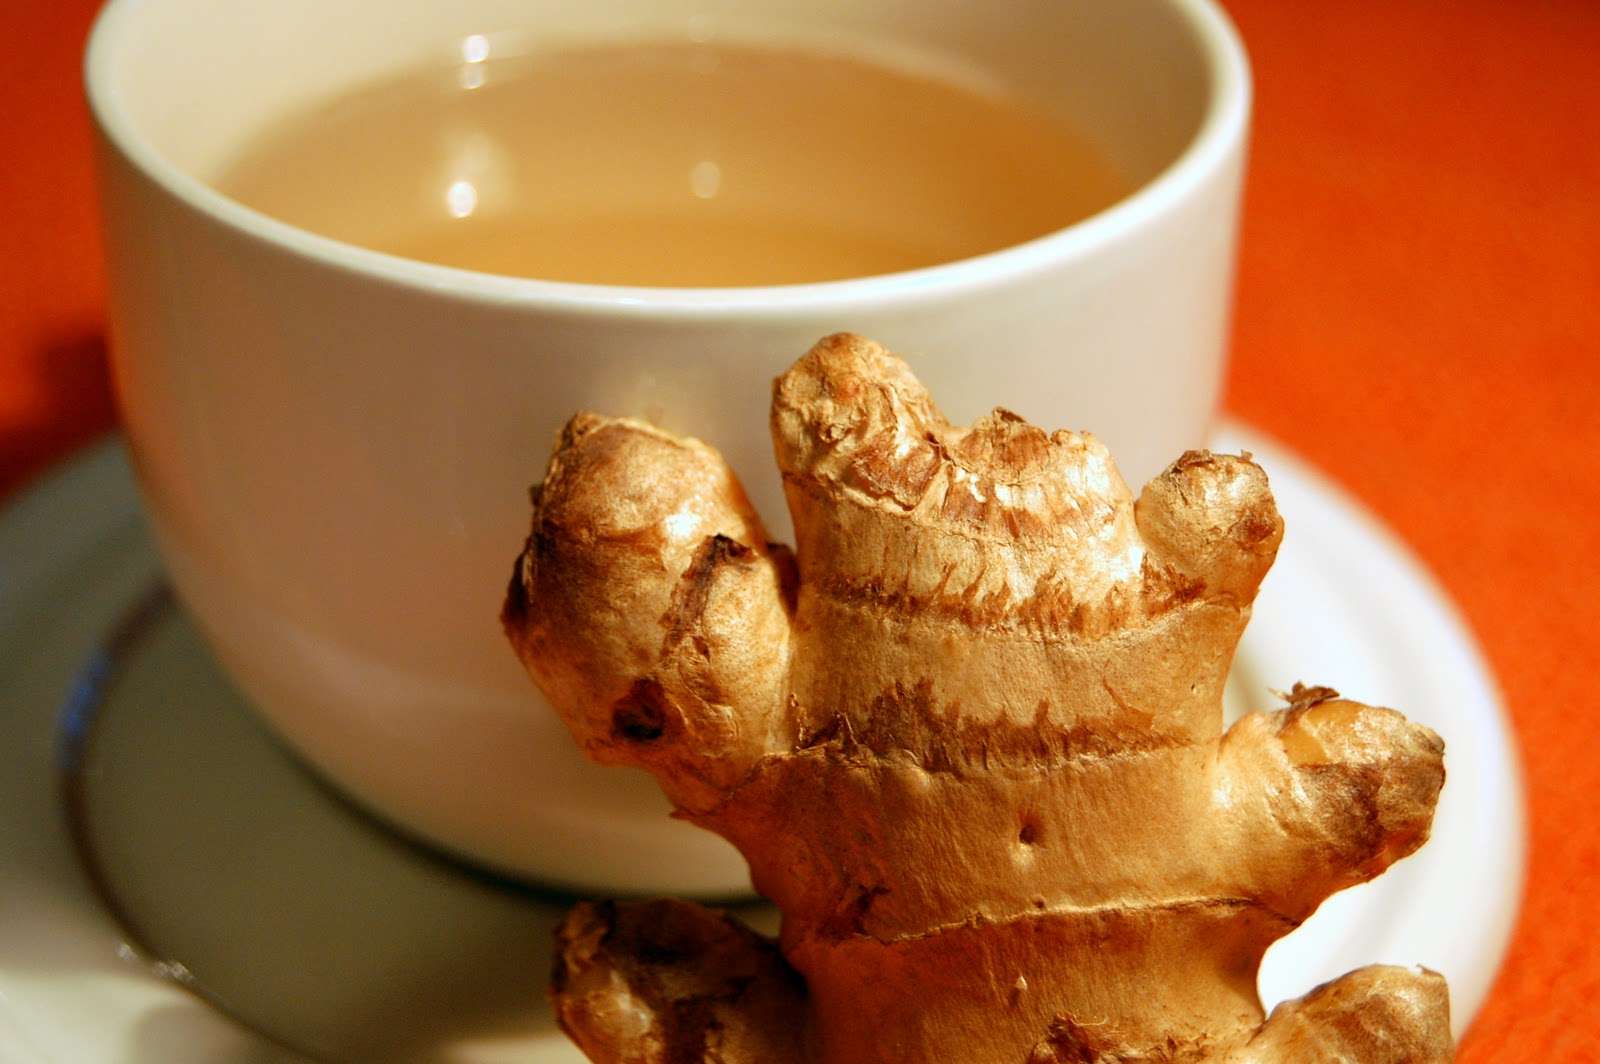 Does Ginger Tea Actually Help the Voice?